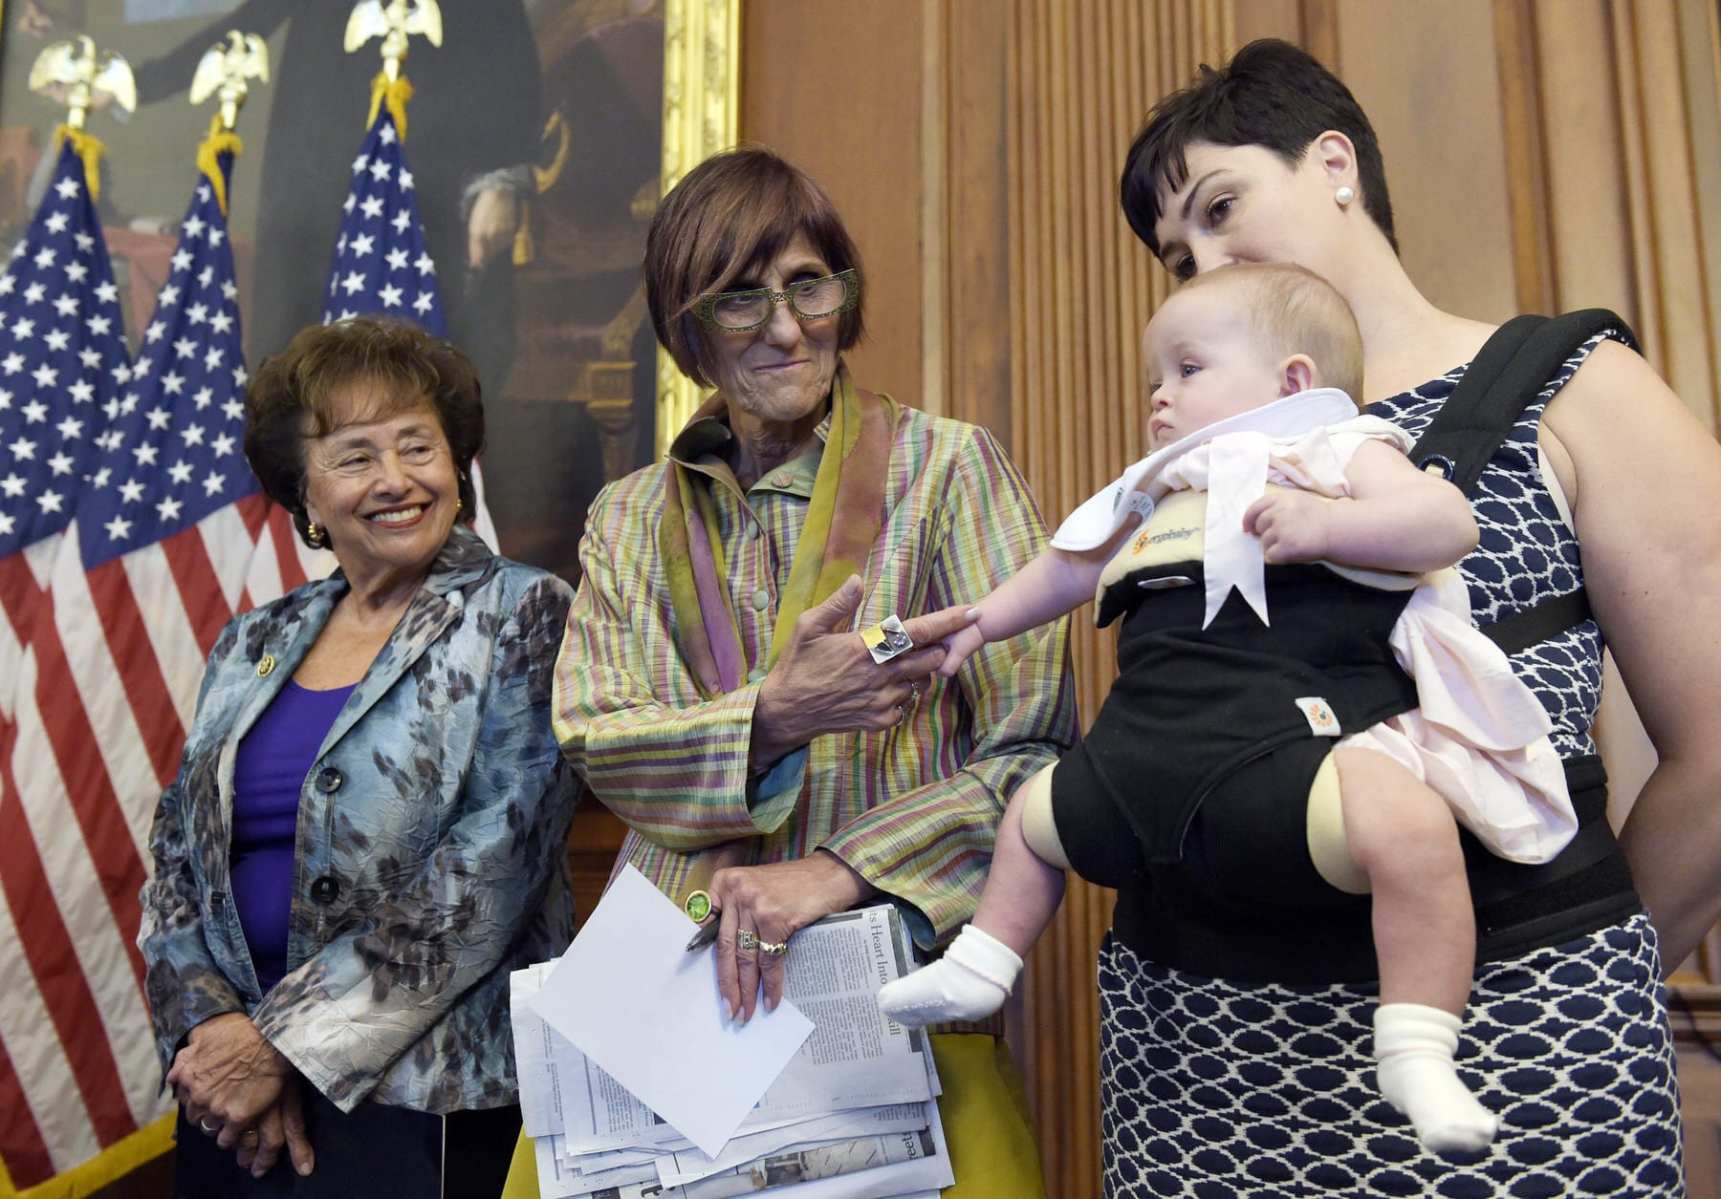 An image of Rep. Rosa DeLauro, D-N.Y. holding a baby's hand at a press conference., during a news conference.